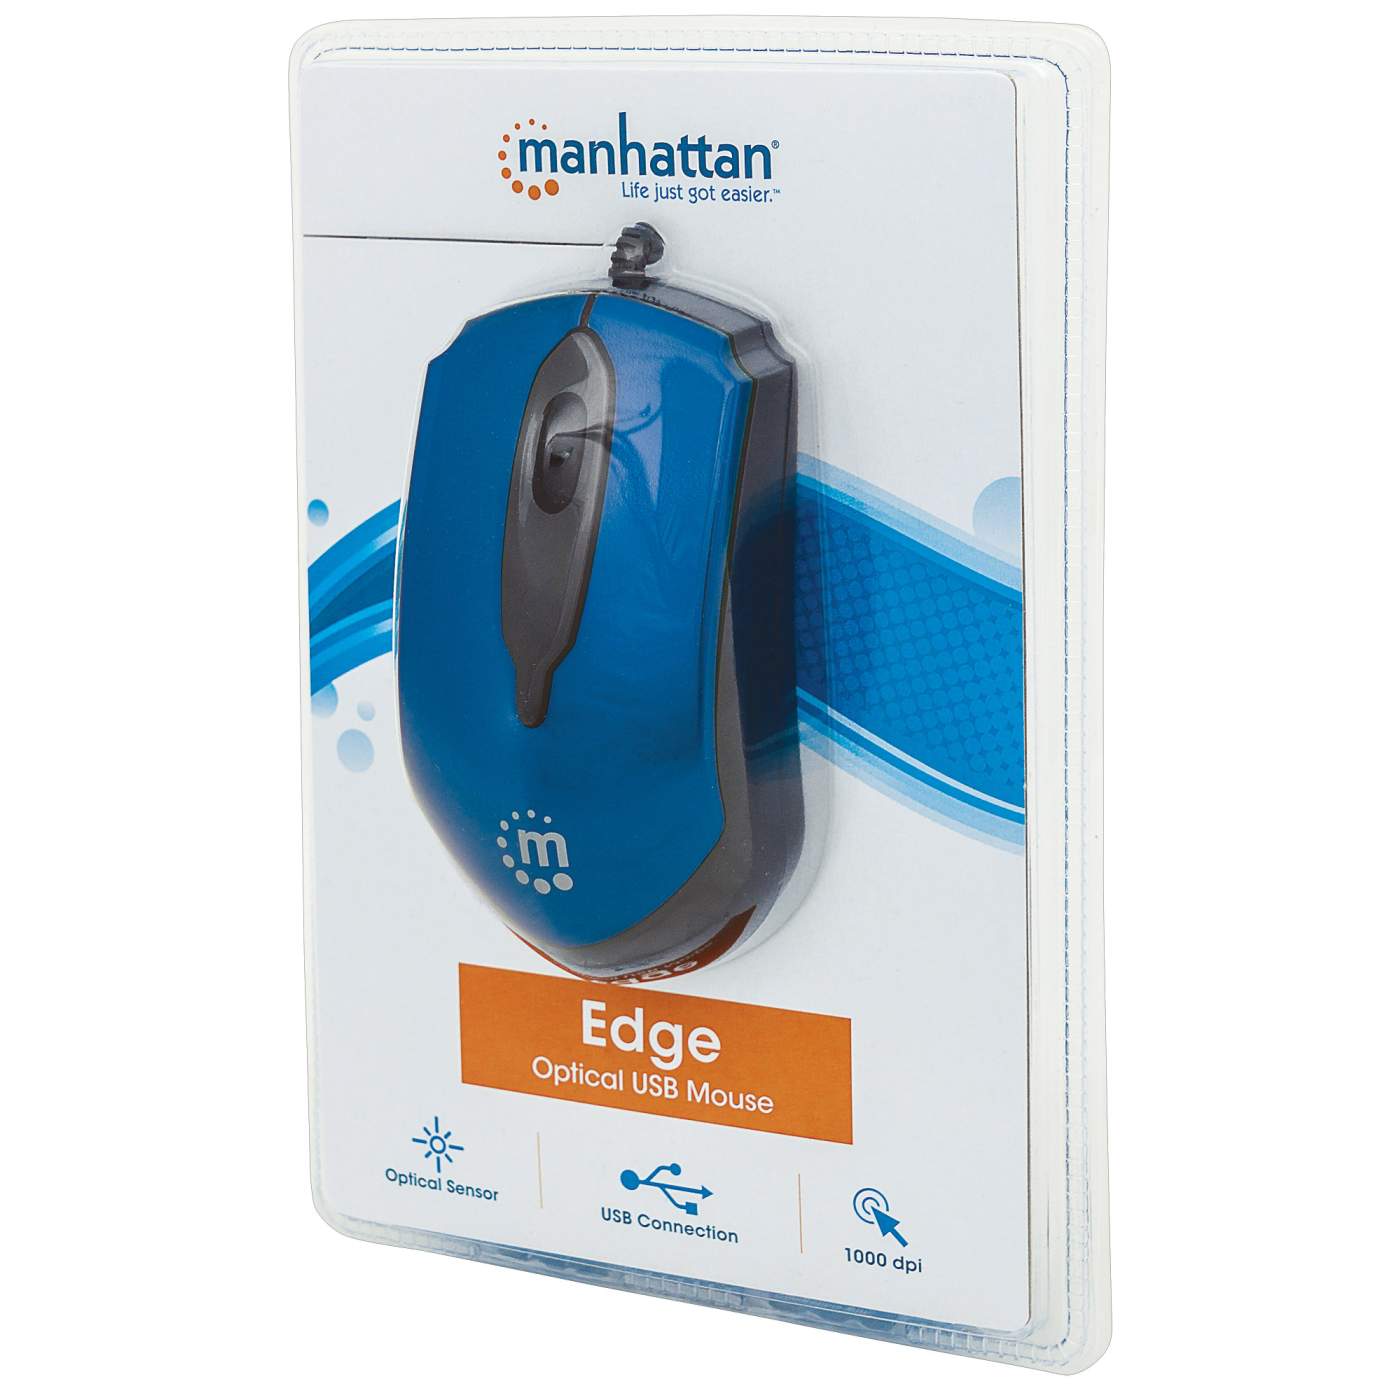 Edge Optical USB Mouse Packaging Image 2